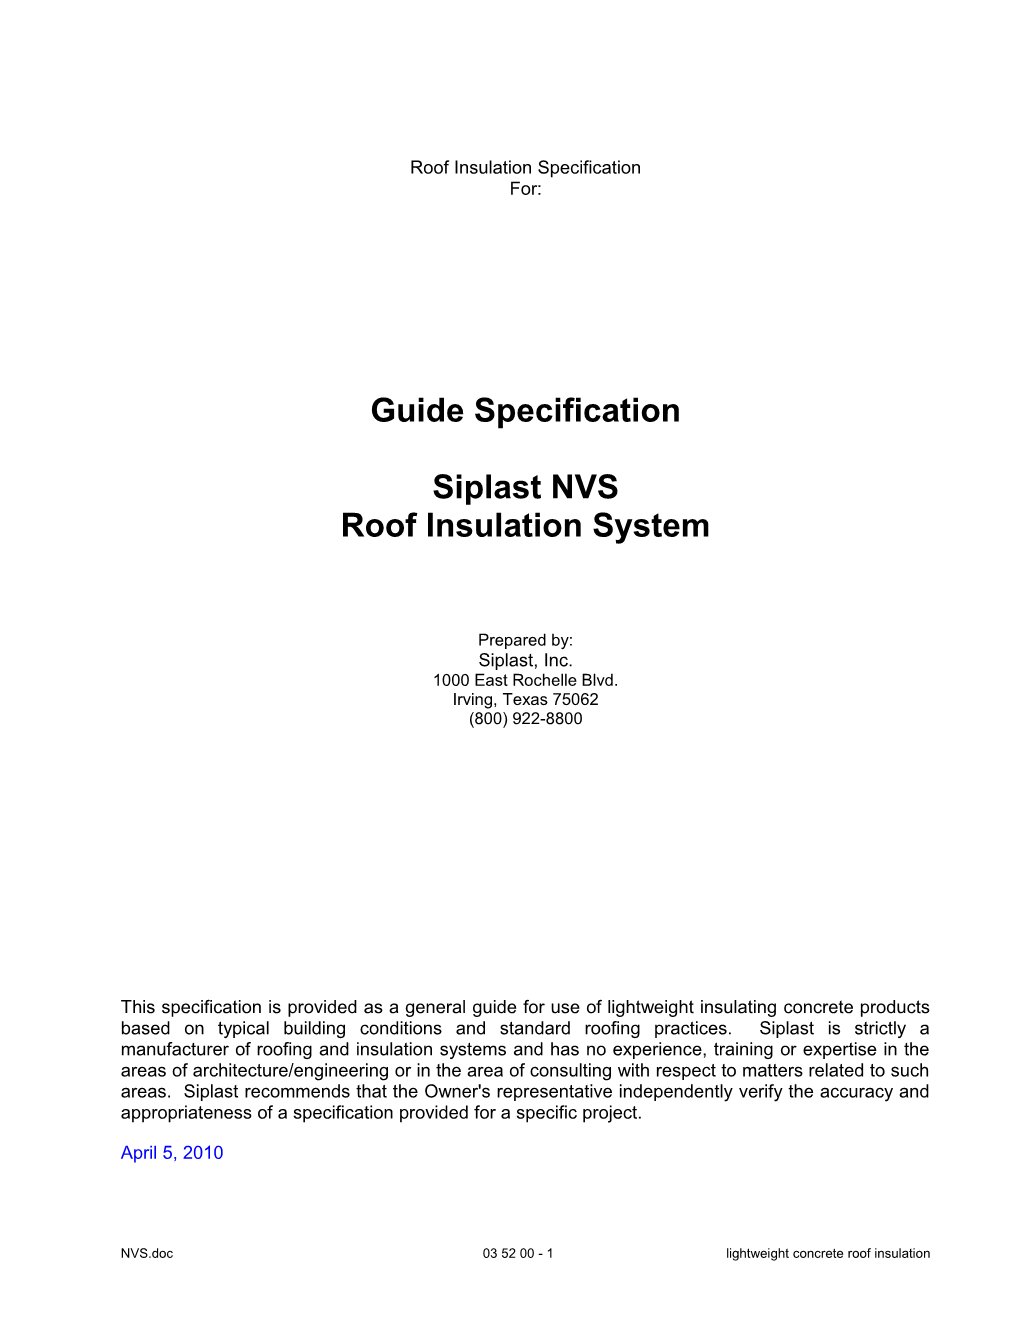 NVS Specification (Revised 8/5/00)